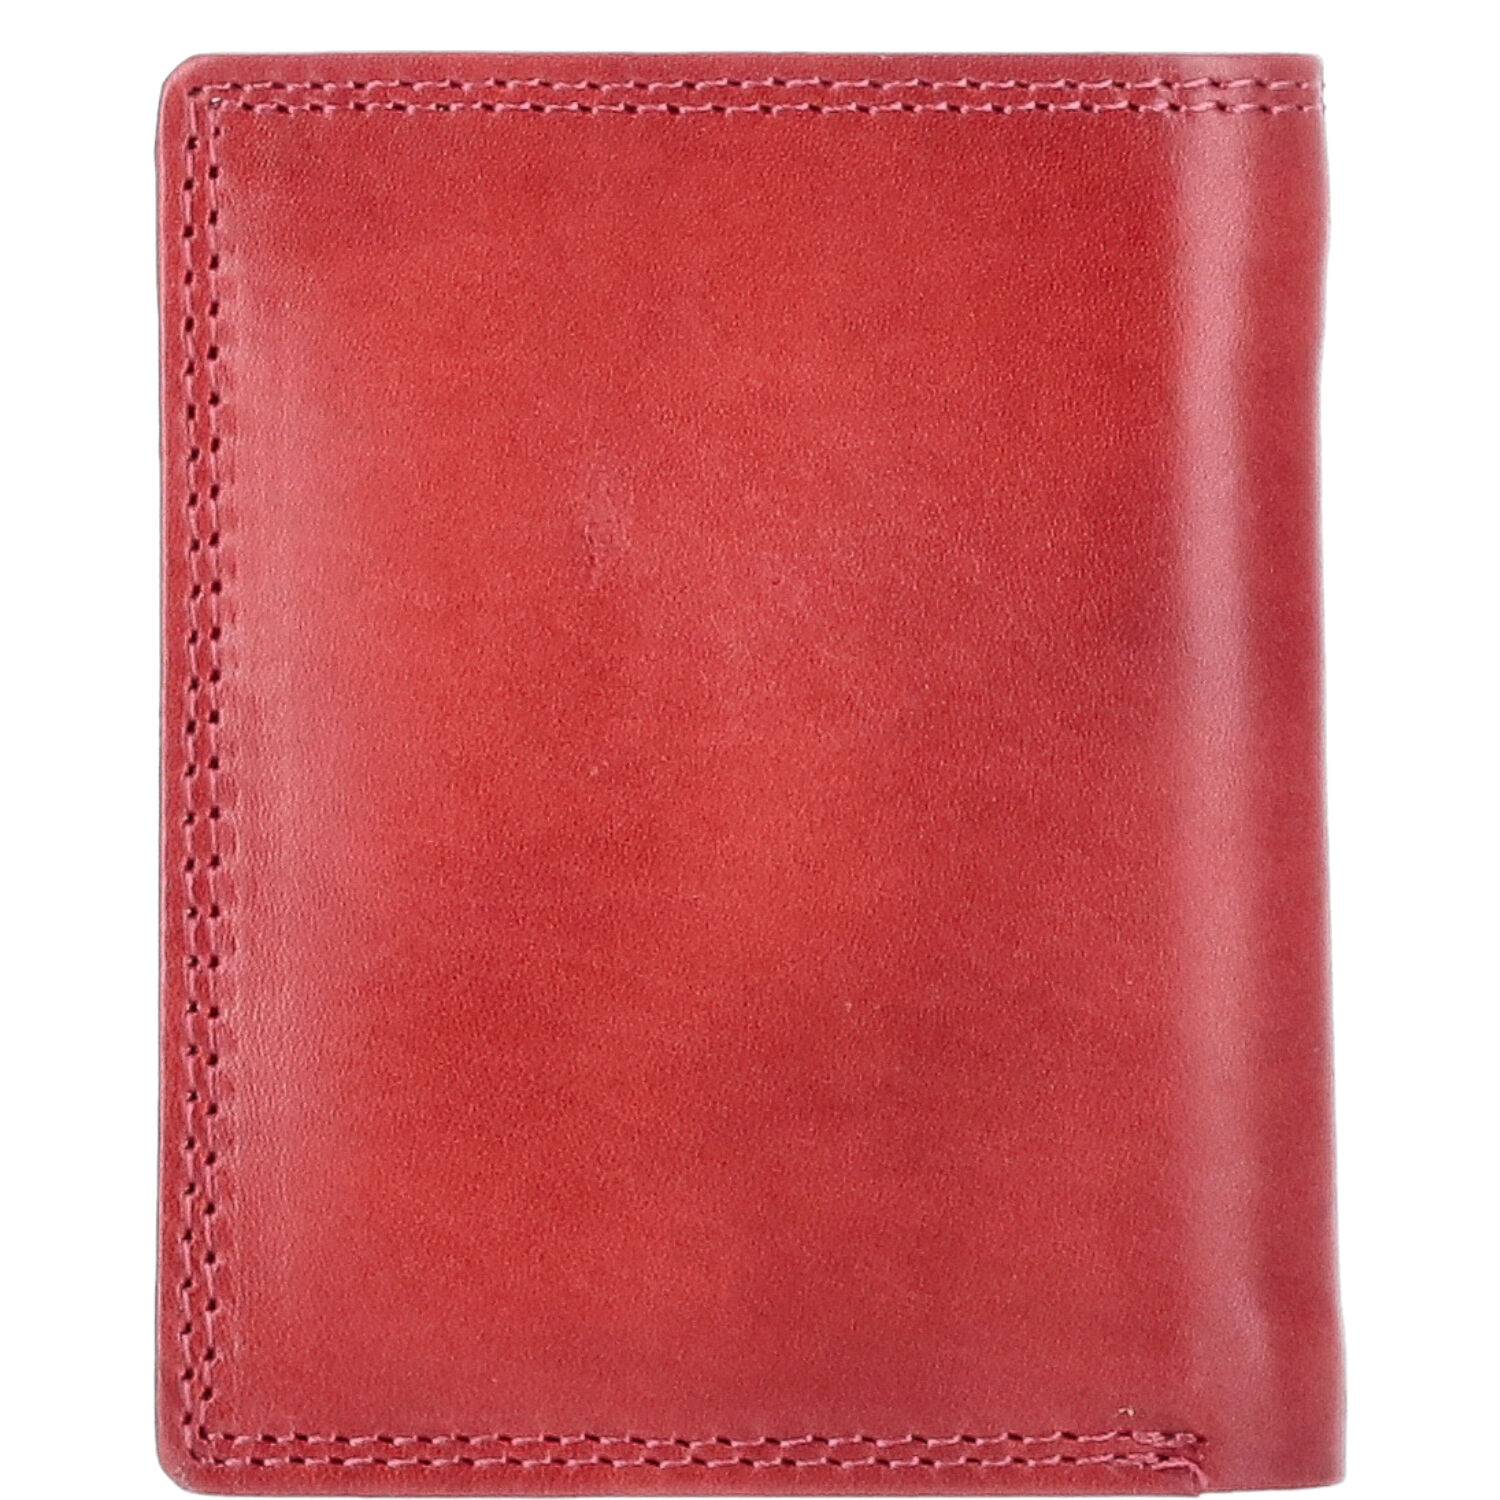 Urban Bull Wallet Washed Leather rot